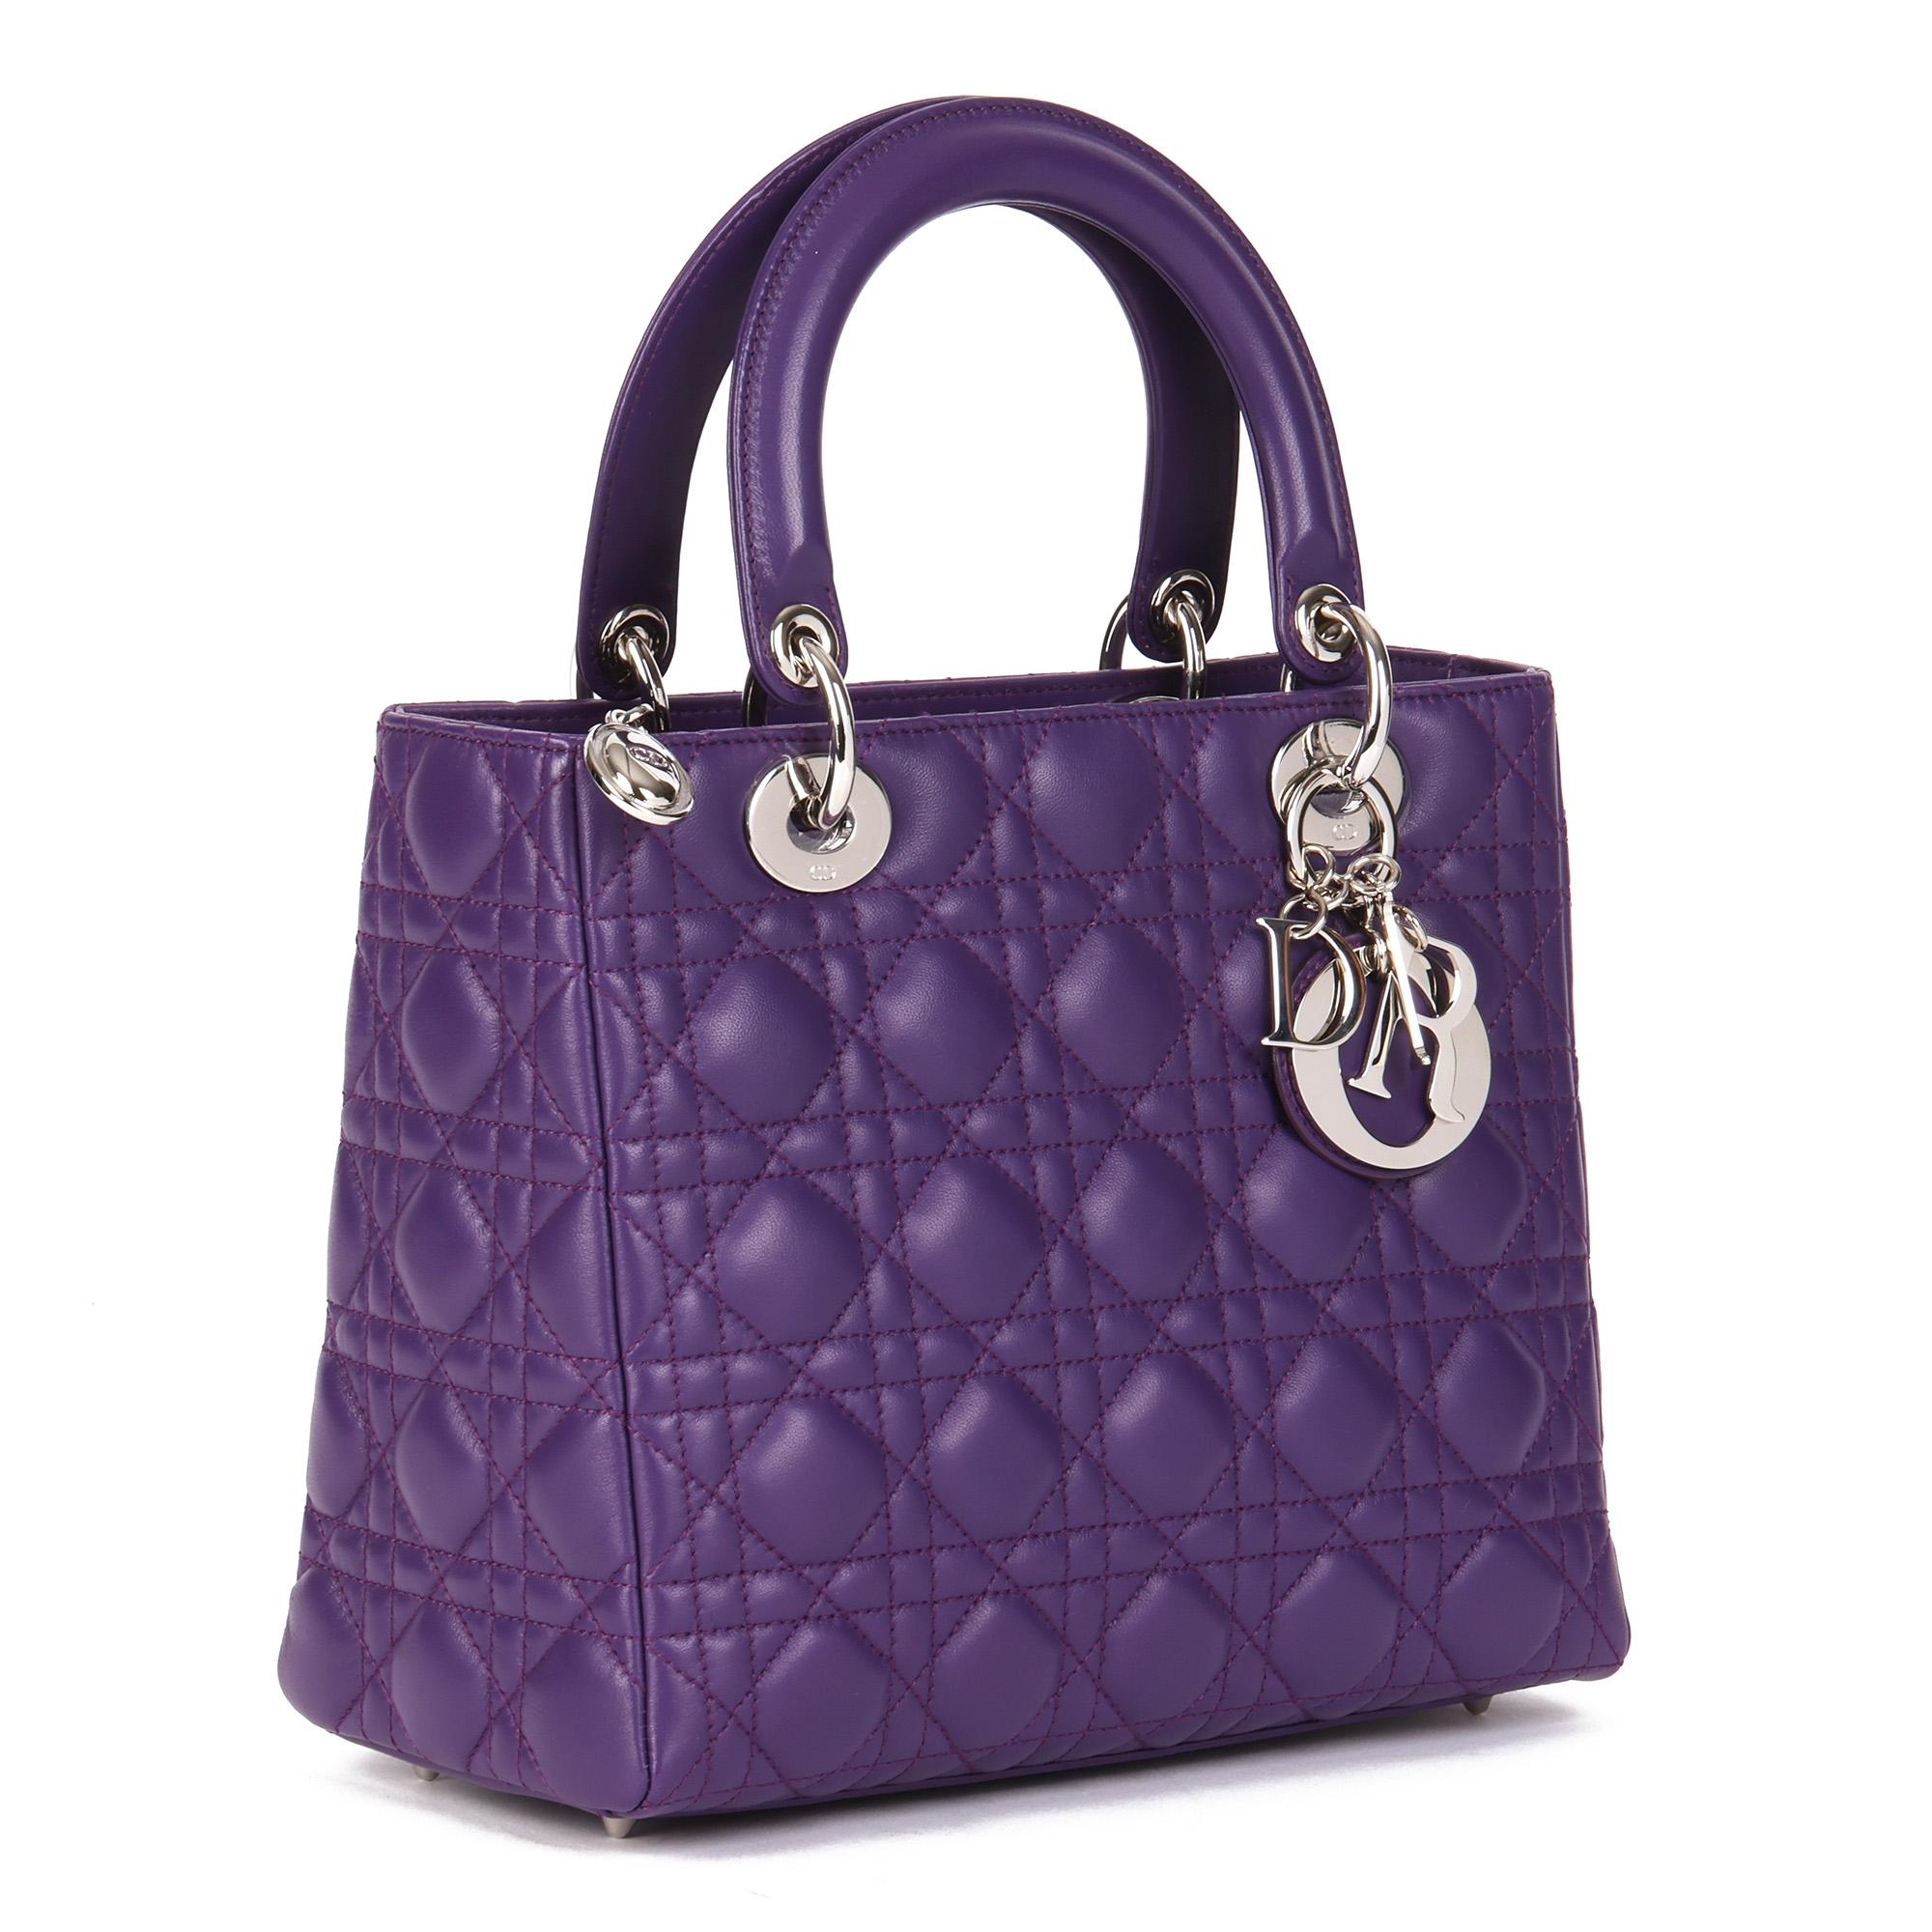 CHRISTIAN DIOR
Violet Cannage Lambskin Leather Medium Lady Dior Bag

Xupes Reference: CB579
Serial Number: 04-MA-0069
Age (Circa): 2009
Accompanied By: Dior Dust Bag, Box, Care Booklet, Authenticity Card, Shoulder Strap, Invoice,